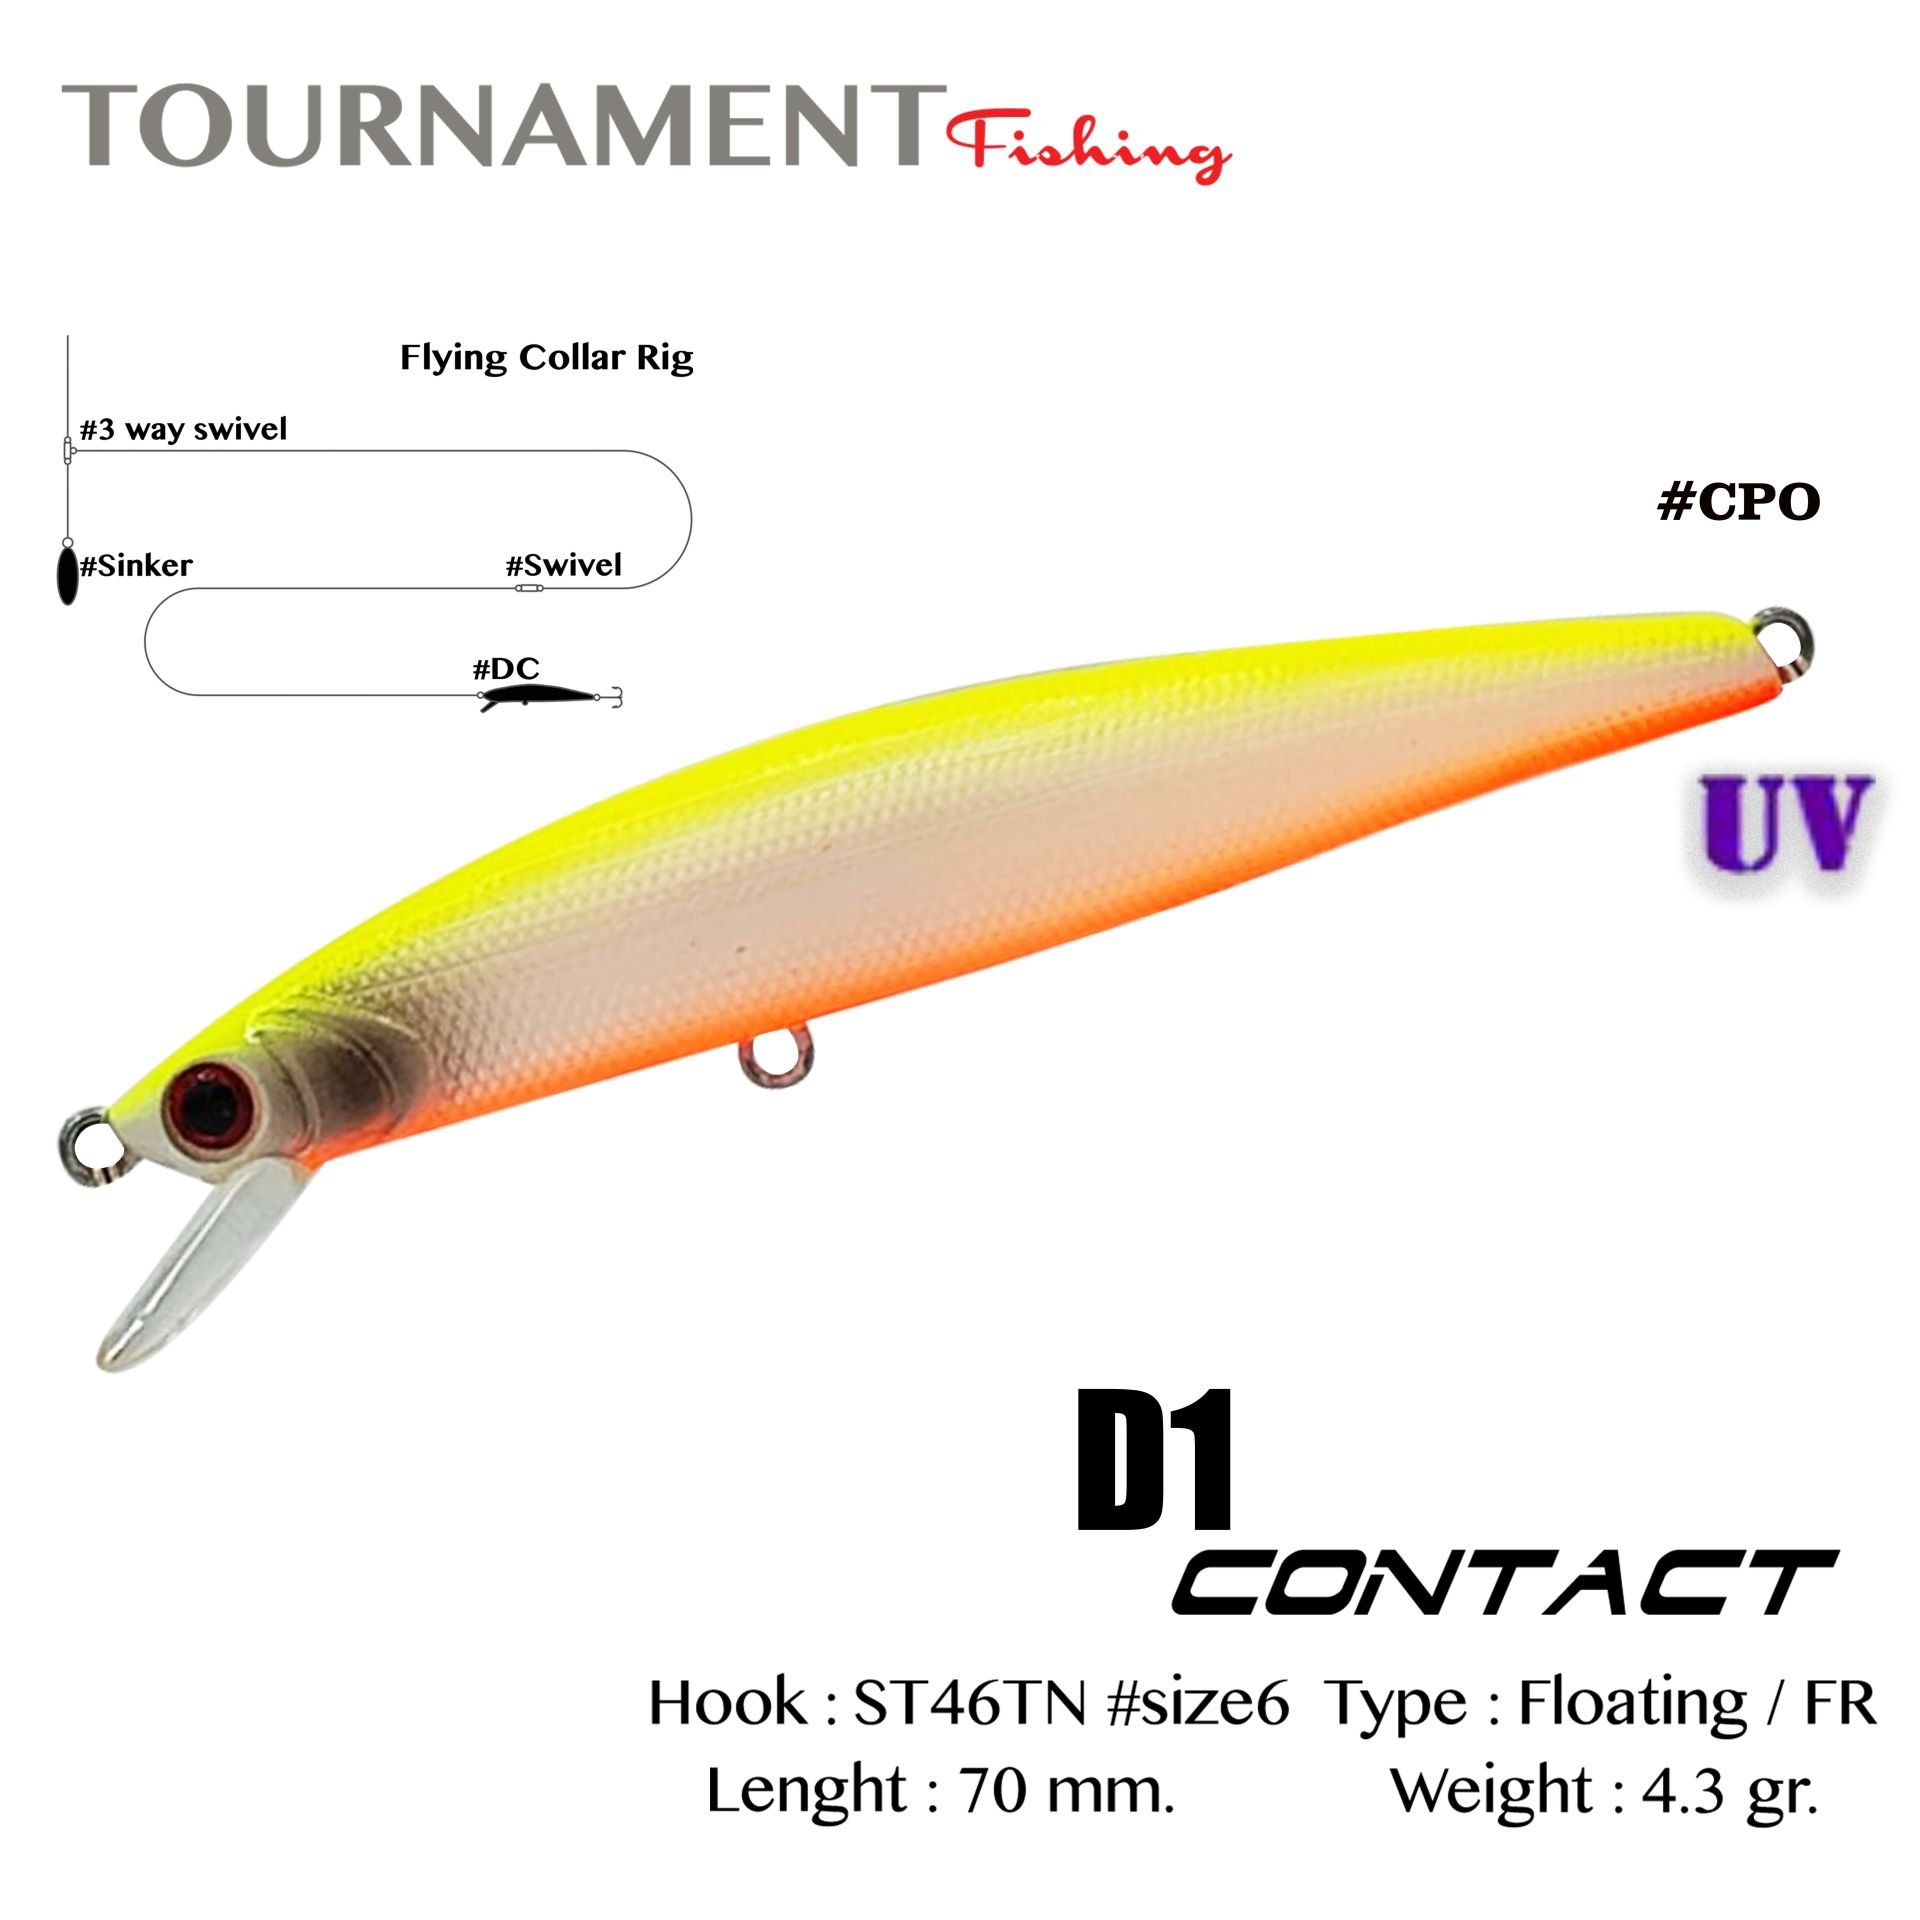 Tournament fishing D1 Contact 70 F 70 mm 4.3 gr #CPO